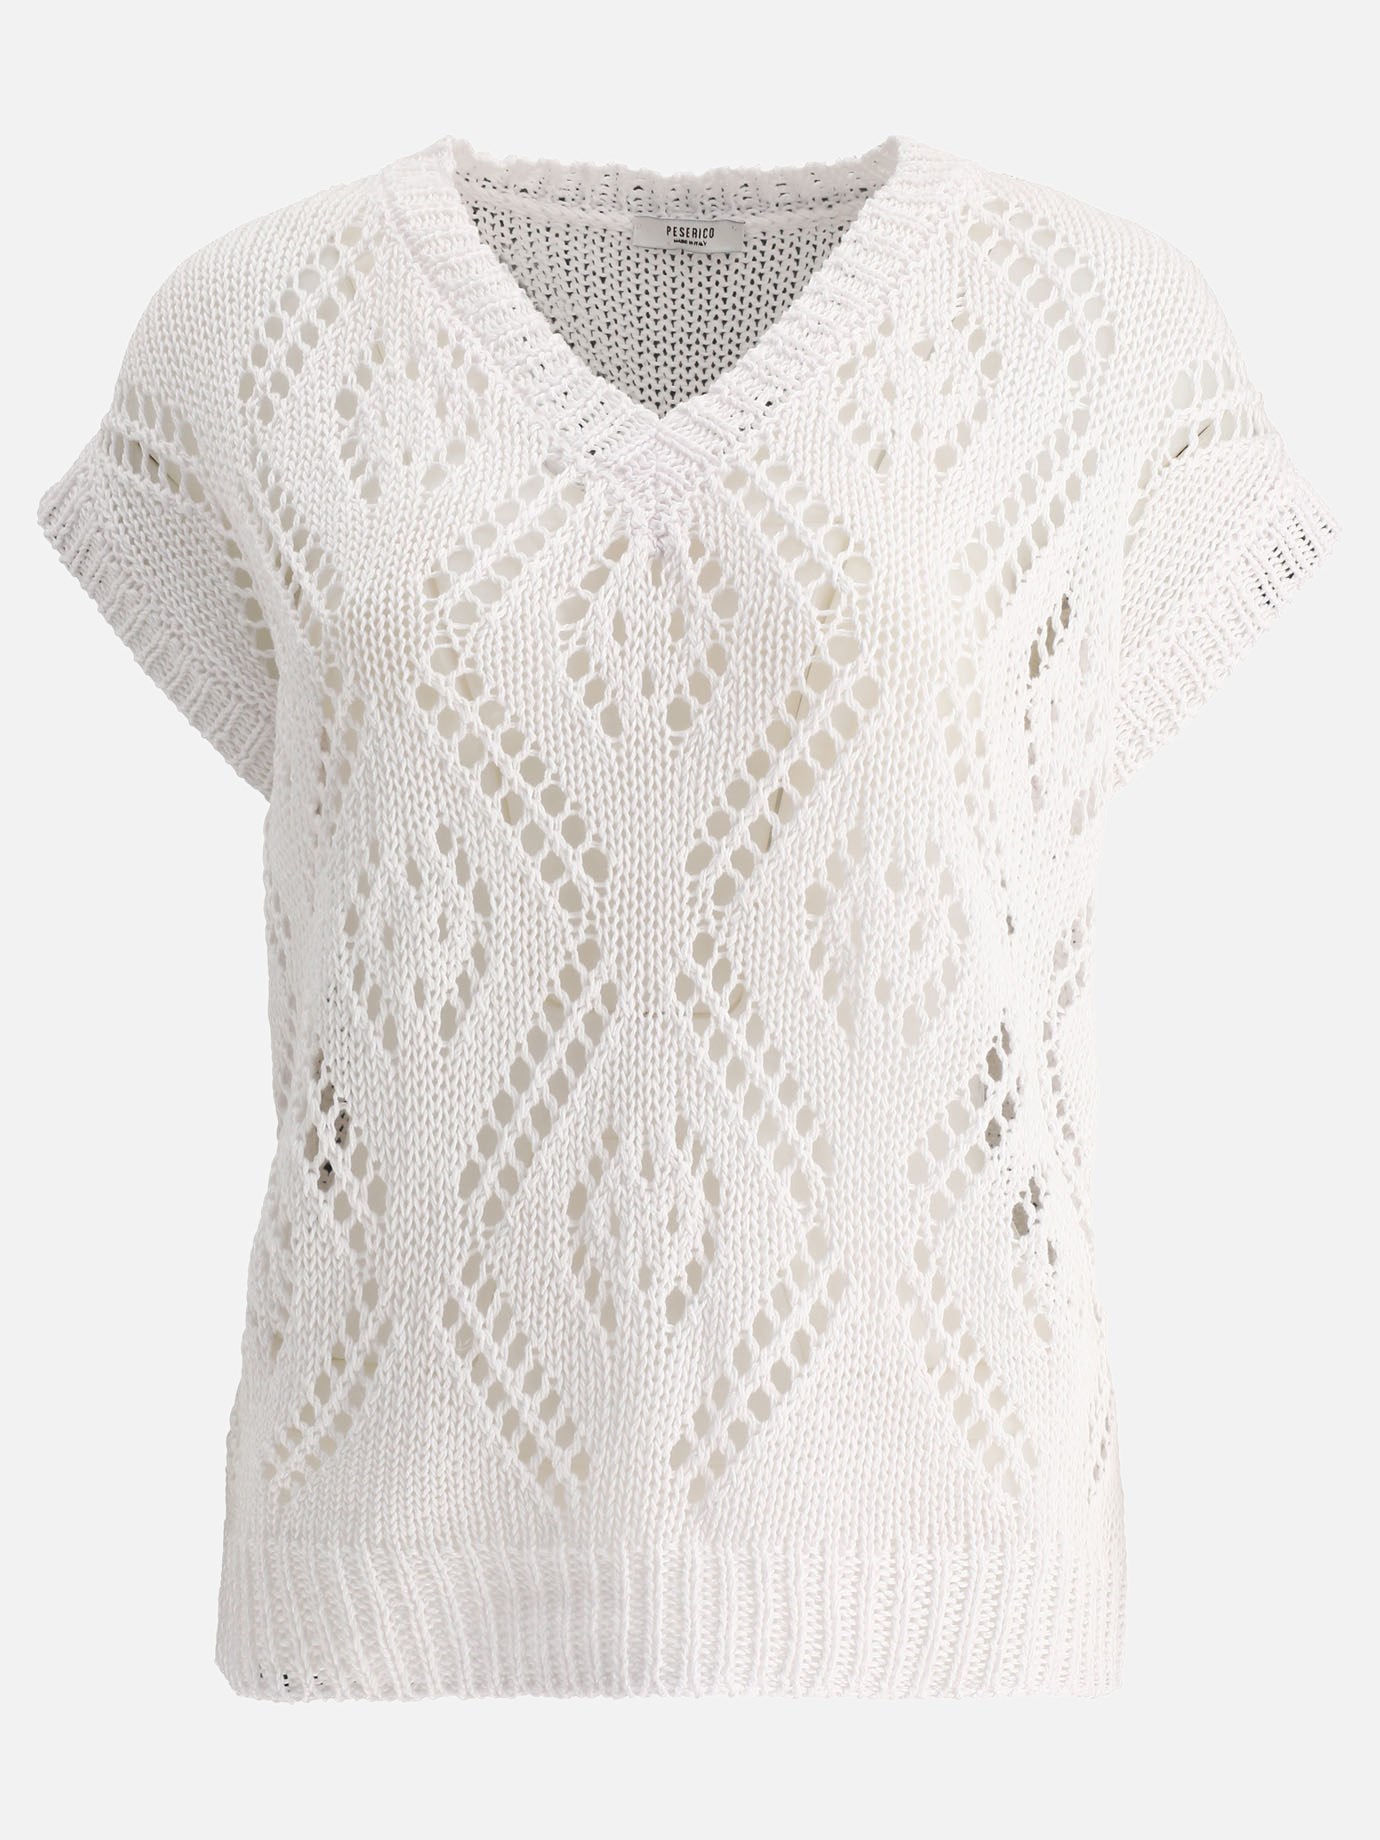 Openwork sweater by Peserico